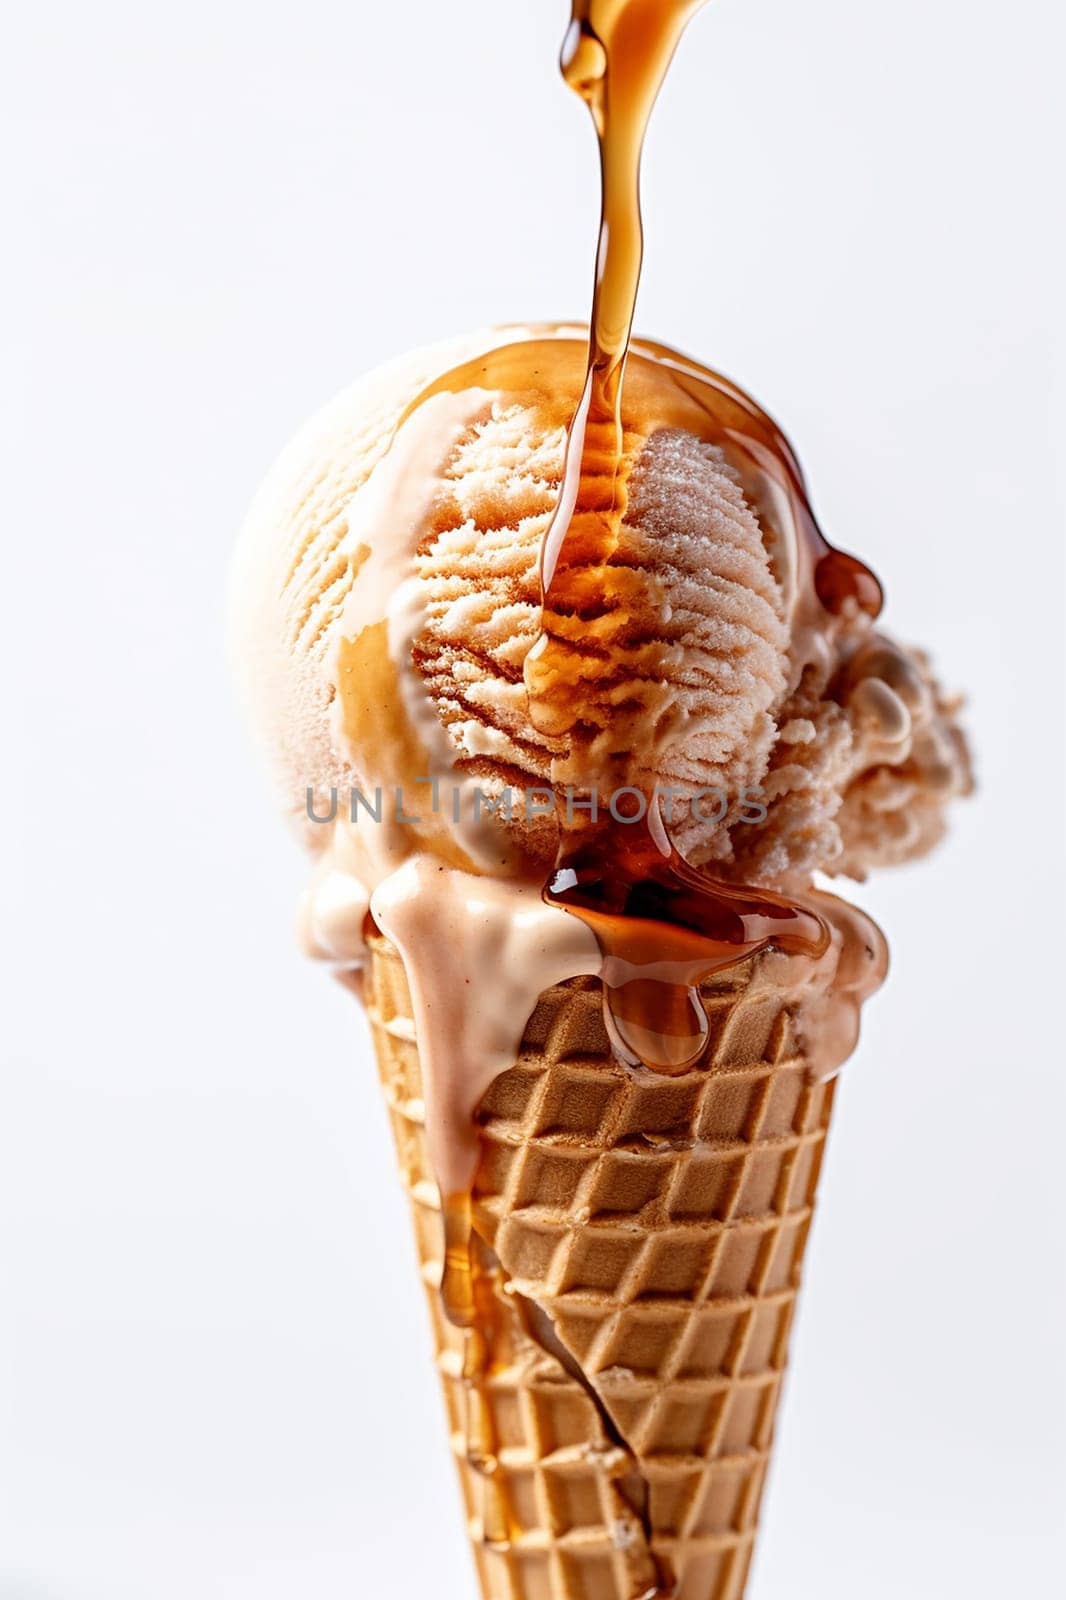 A scoop of ice cream on a cone with caramel drizzling over it.